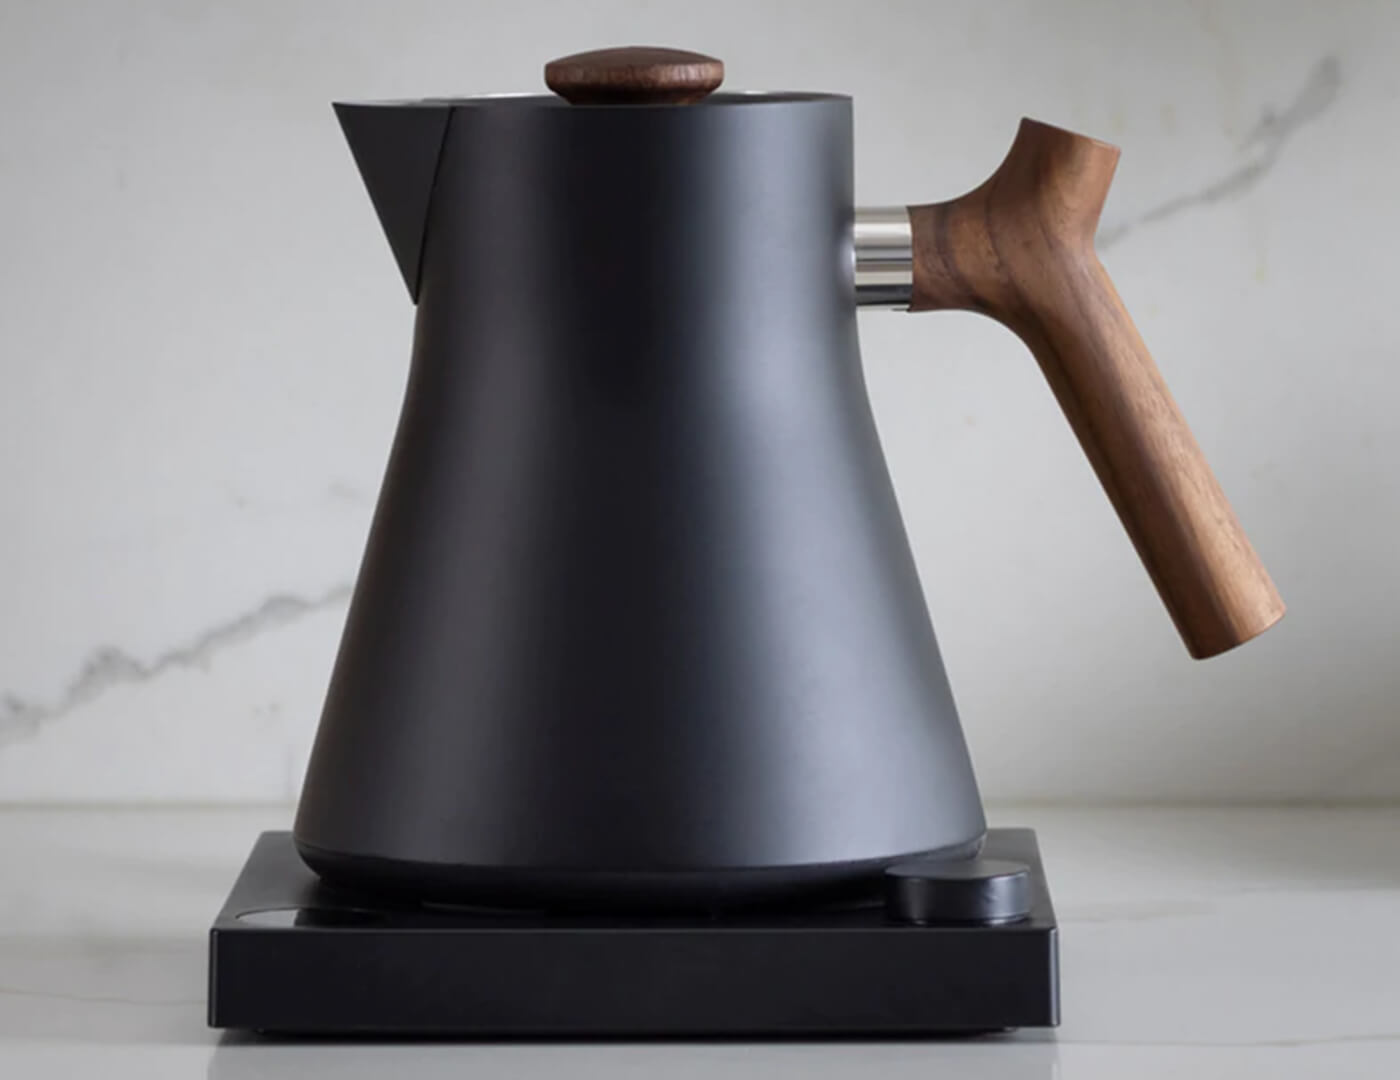 Black Corvo Kettle EKG with Walnut handle side view, resting on base, on kitchen counter